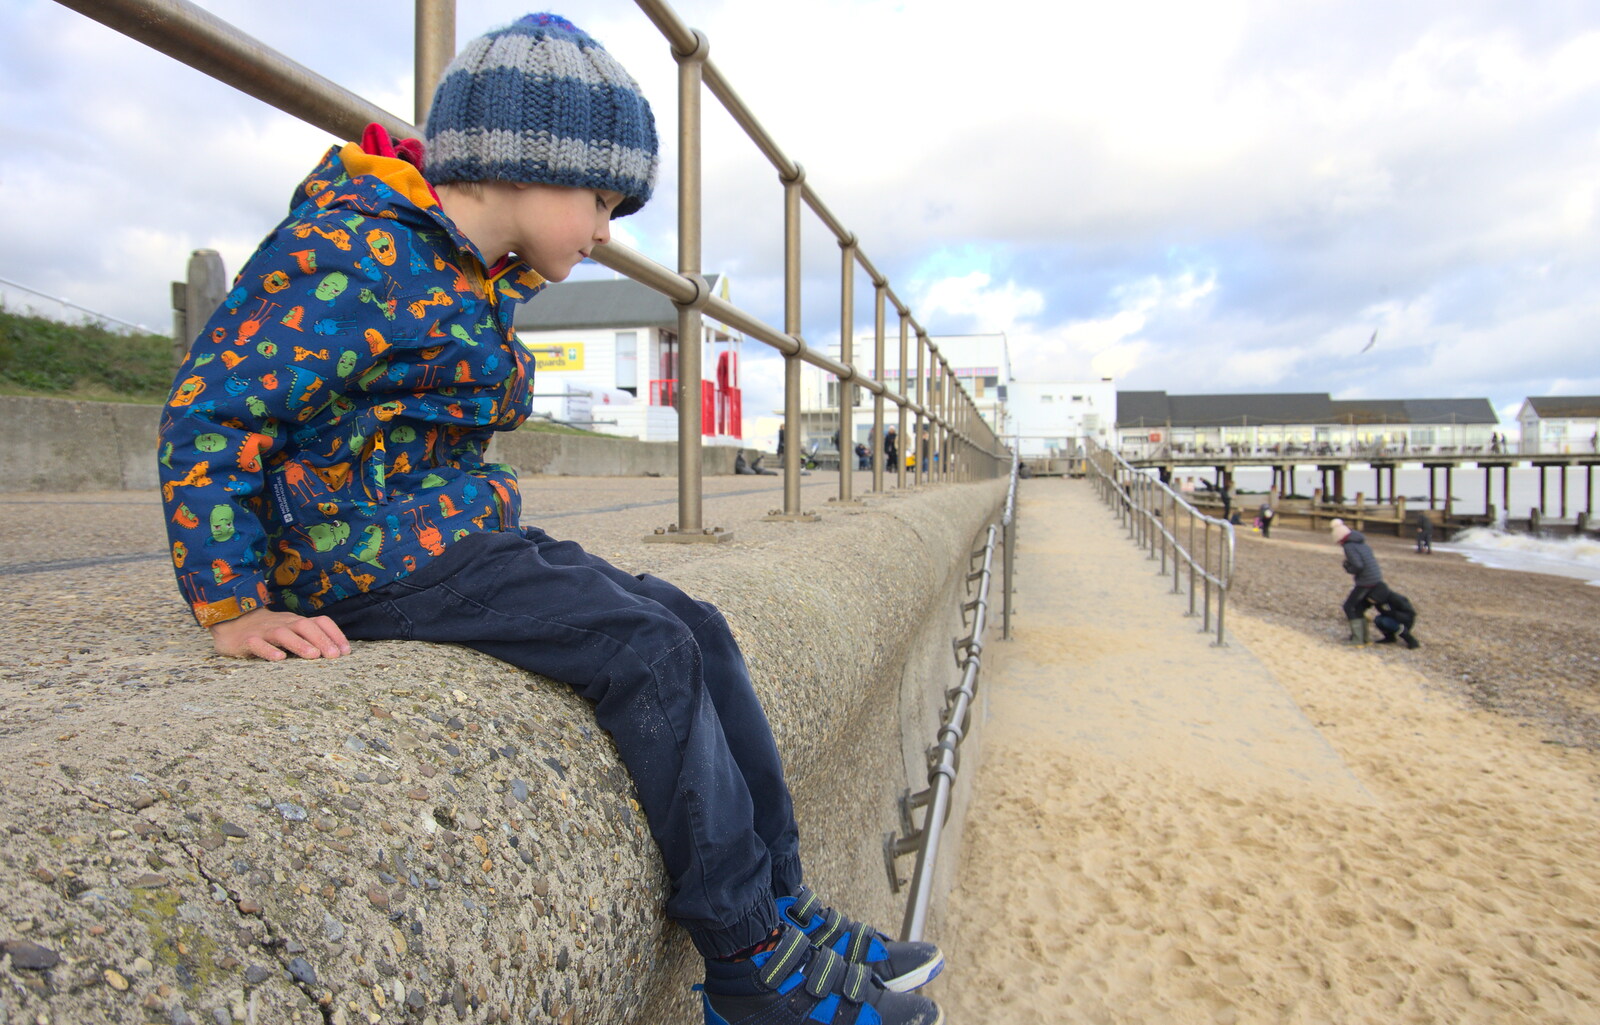 Harry on the sea wall from A Trip to the Amusements, Southwold Pier, Southwold, Suffolk - 5th November 2017